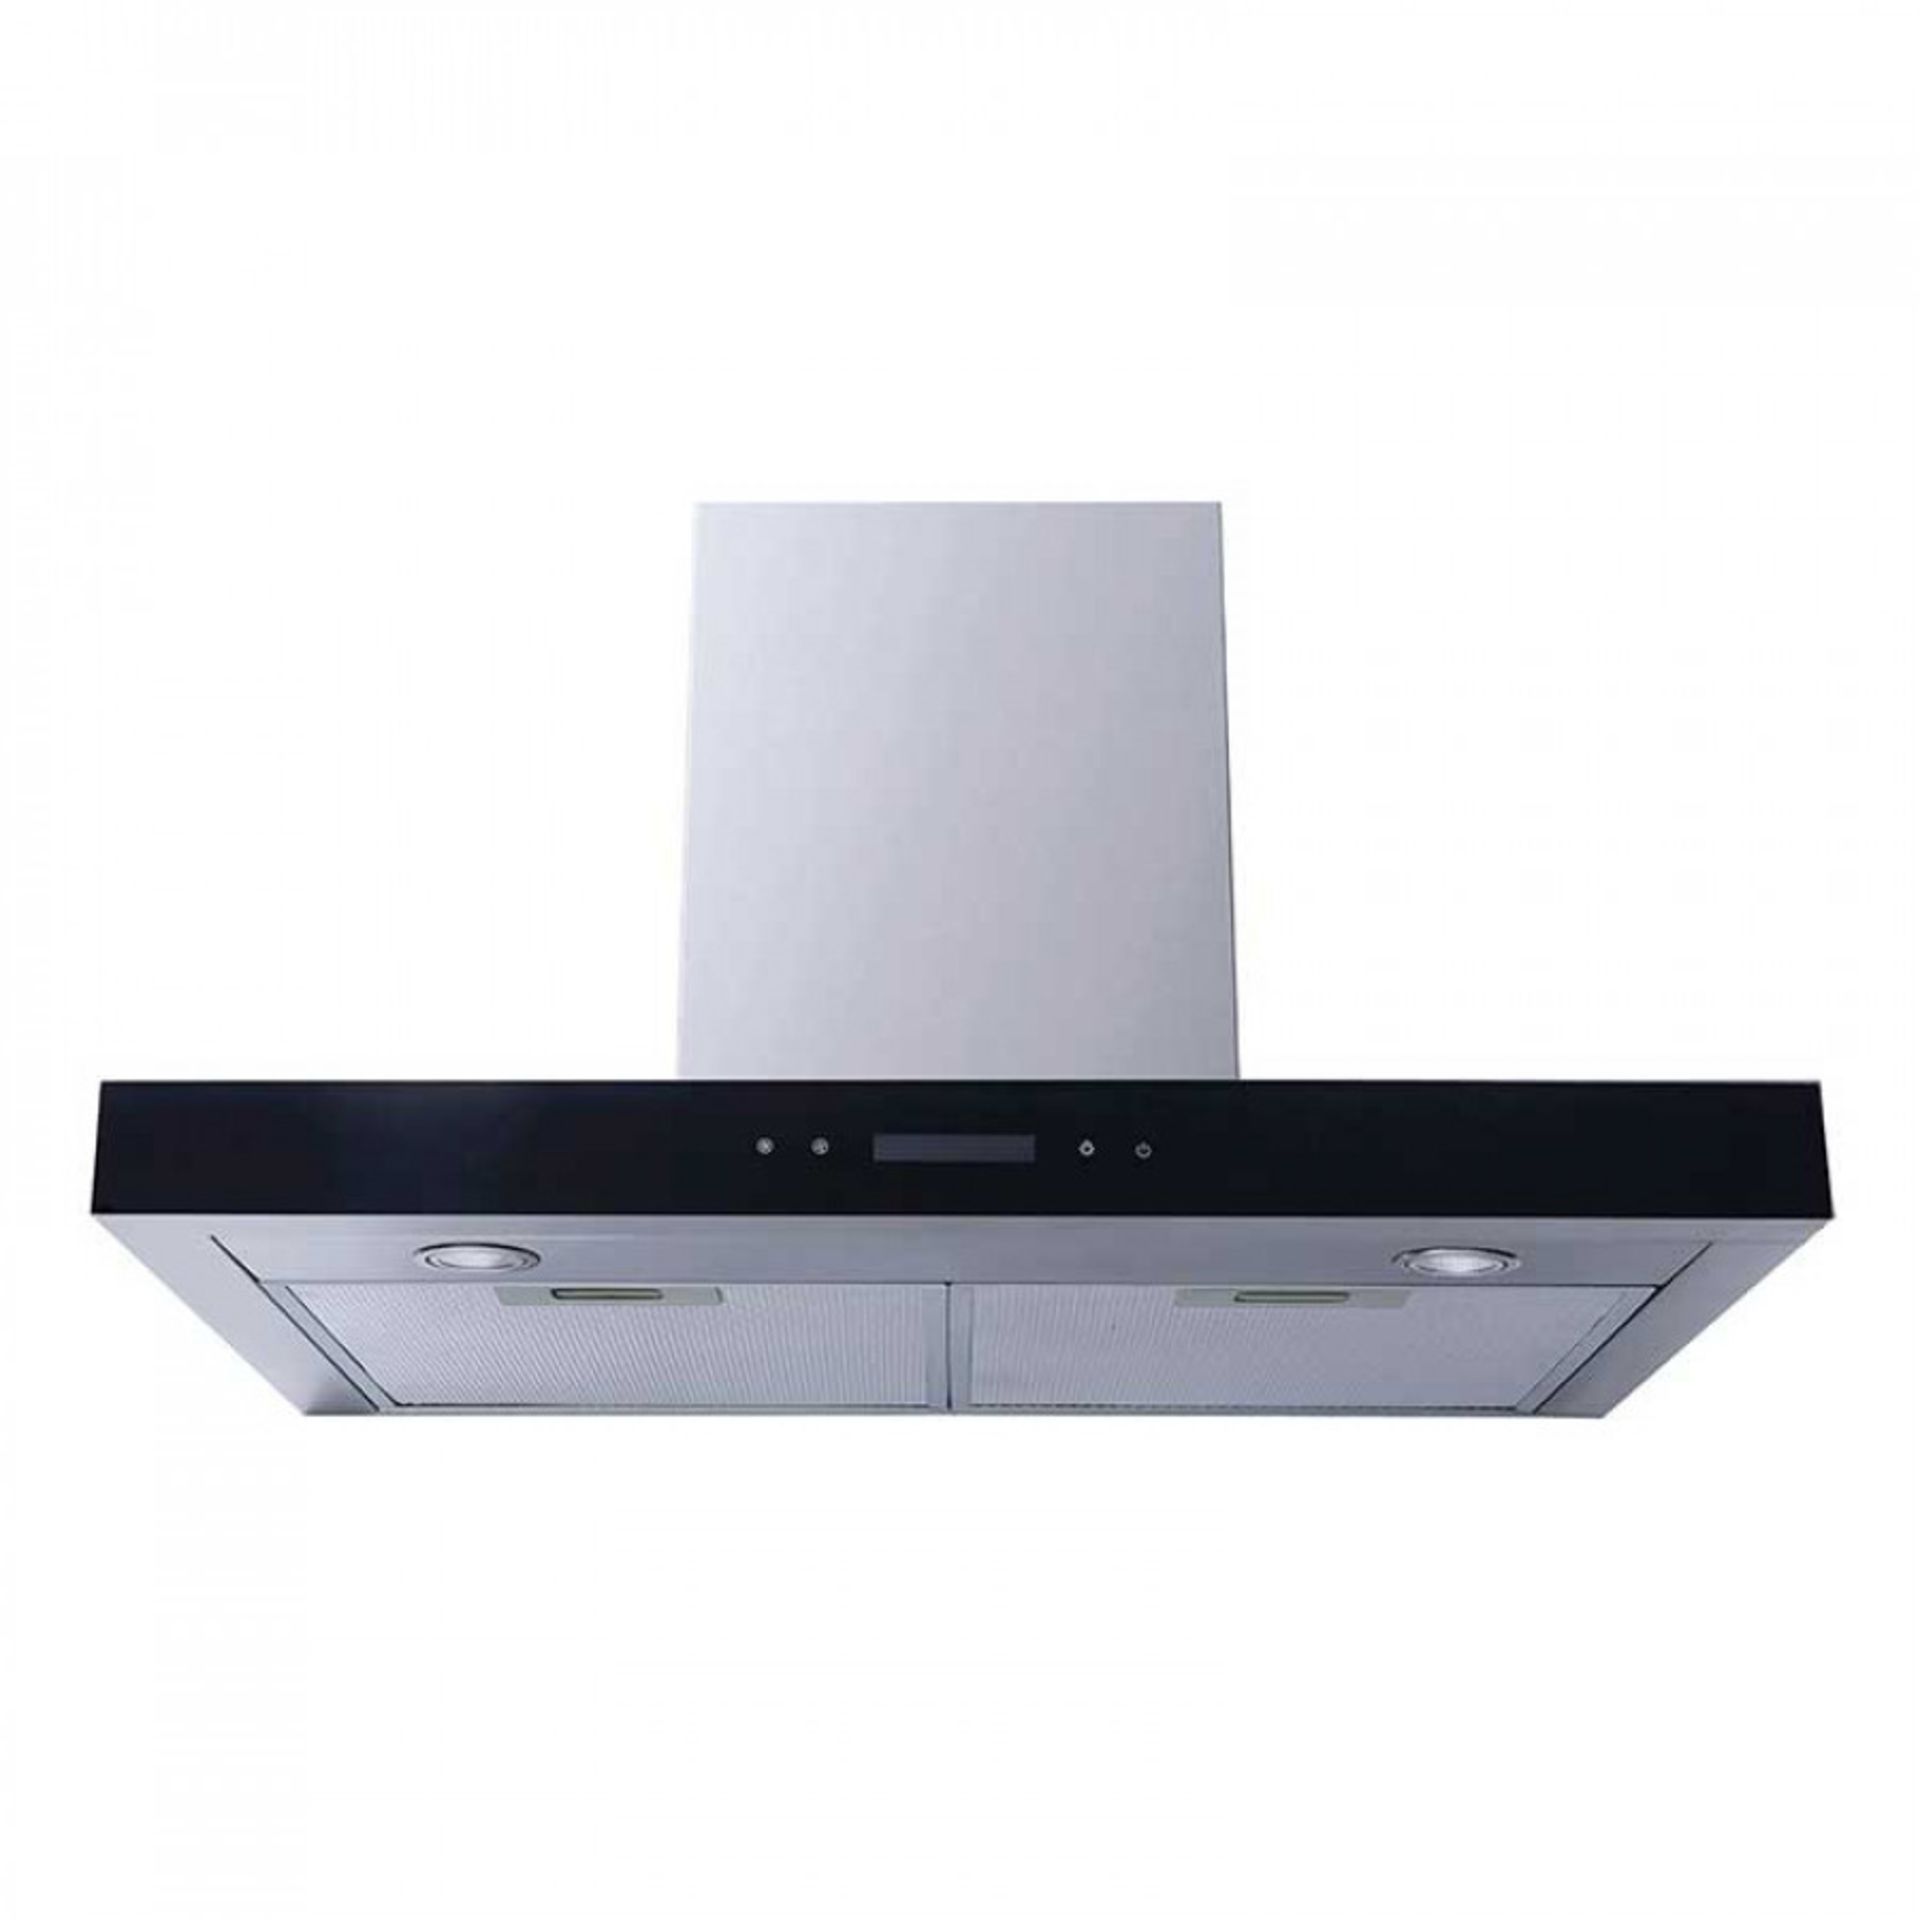 (KA32) PRIMA+ 60CM TOUCH CONTROL BOX CHIMNEY HOOD - ST/STEEL - PRCH026 RRP £230.00 Prima cook...